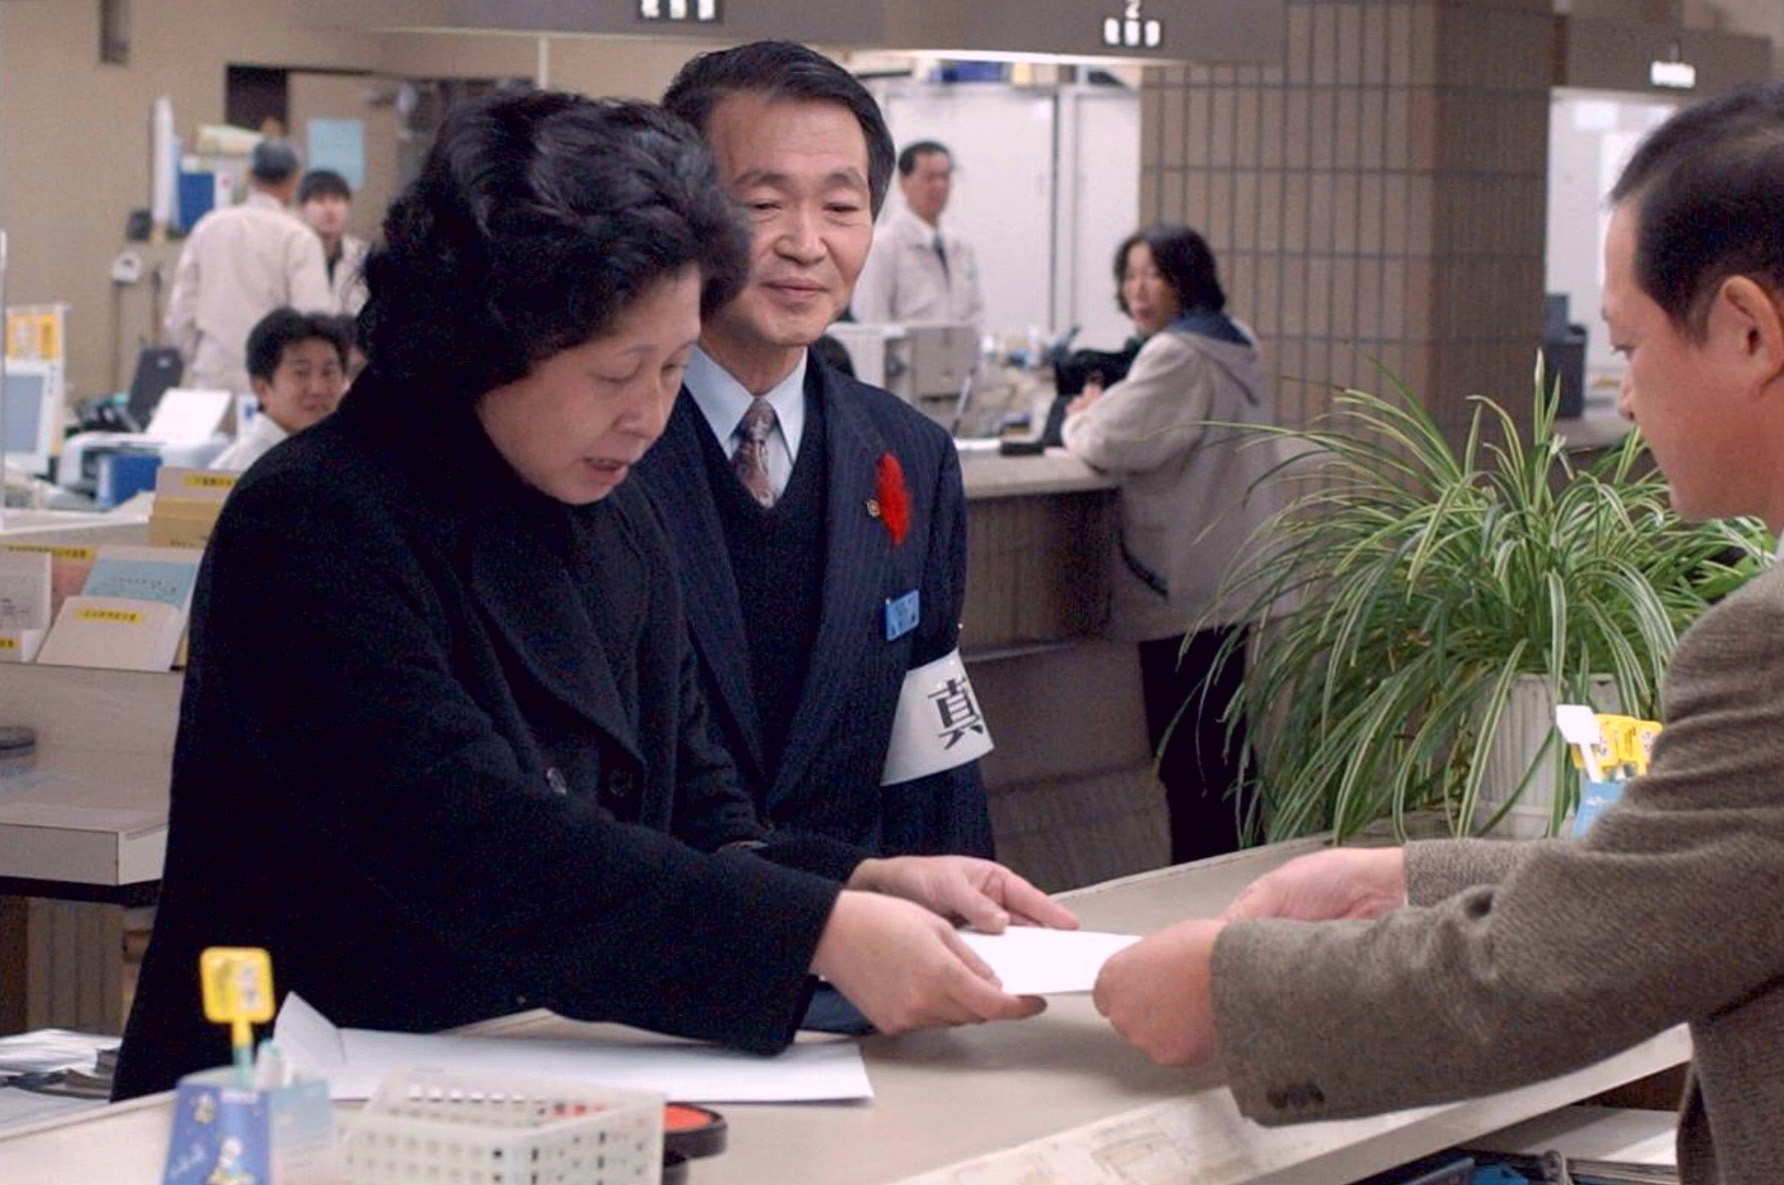 Japanese again: Hitomi Soga, who was abducted to North Korea in 1978, hands papers to an official at Mano town office on the island of Sadogashima, Niigata Prefecture, in 2002, to have her information reentered in her family's koseki family register. Soga had been removed from the family register as a missing person 16 years earlier. | KYODO